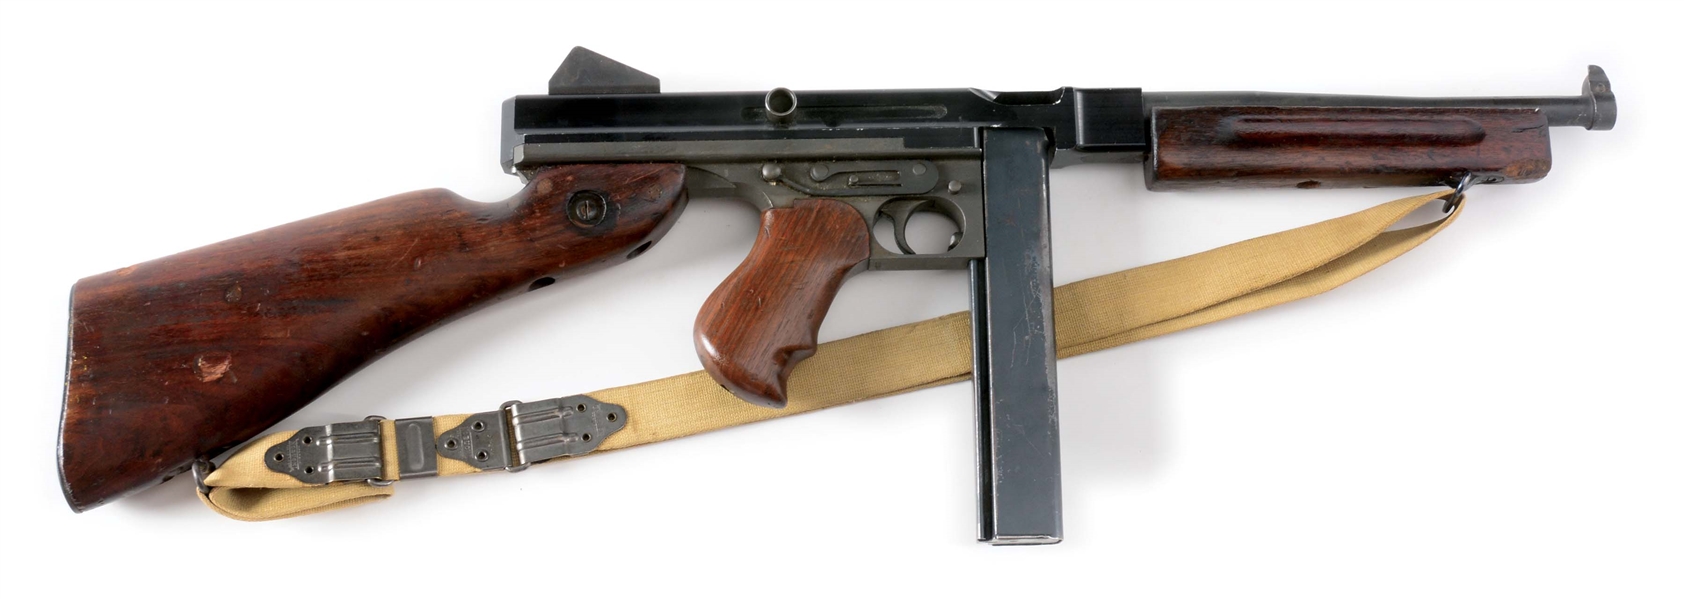 DUMMY WWII THOMPSON M1A1 SMG.